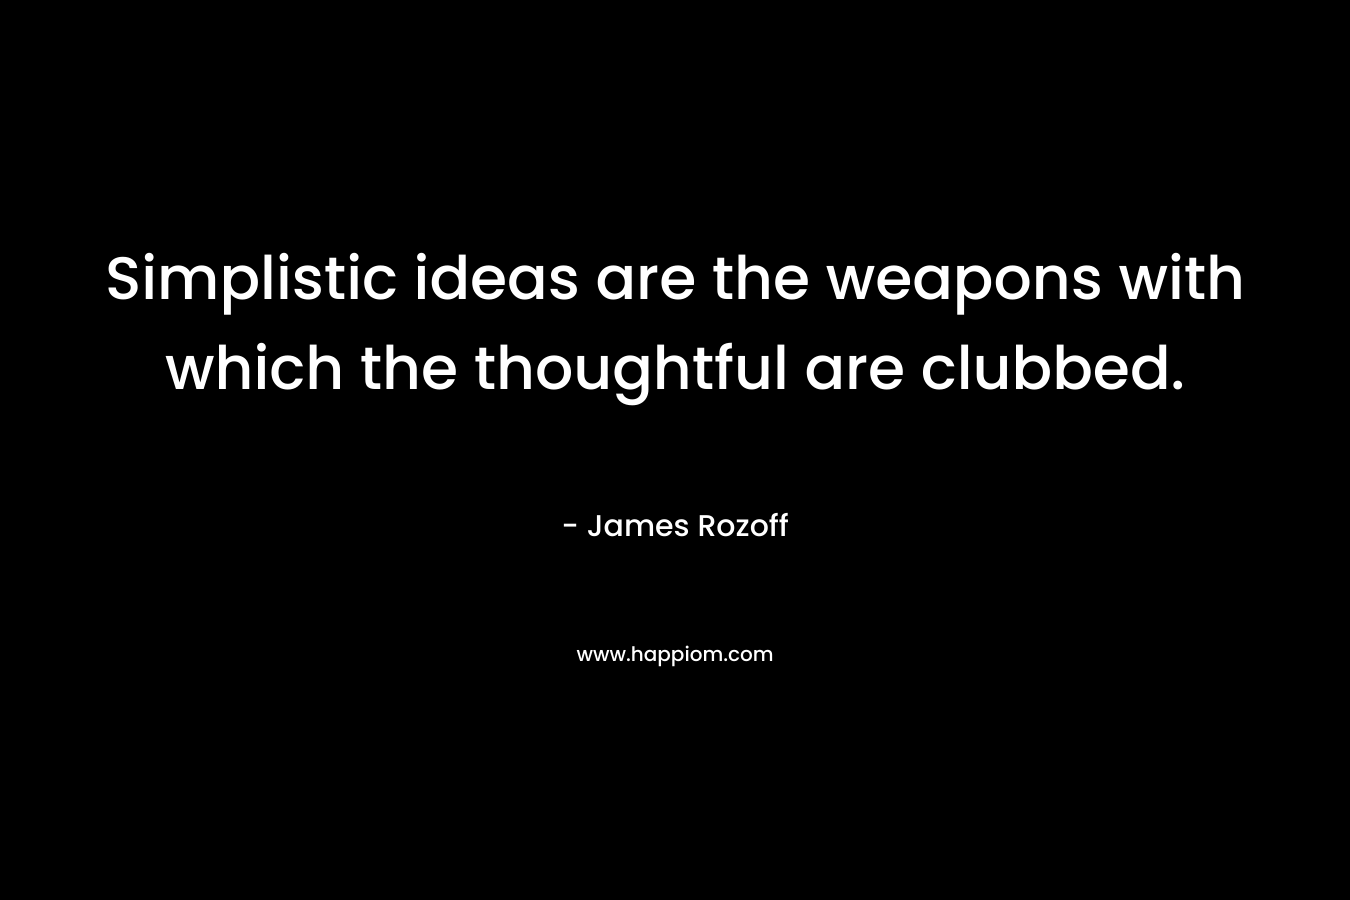 Simplistic ideas are the weapons with which the thoughtful are clubbed. – James Rozoff